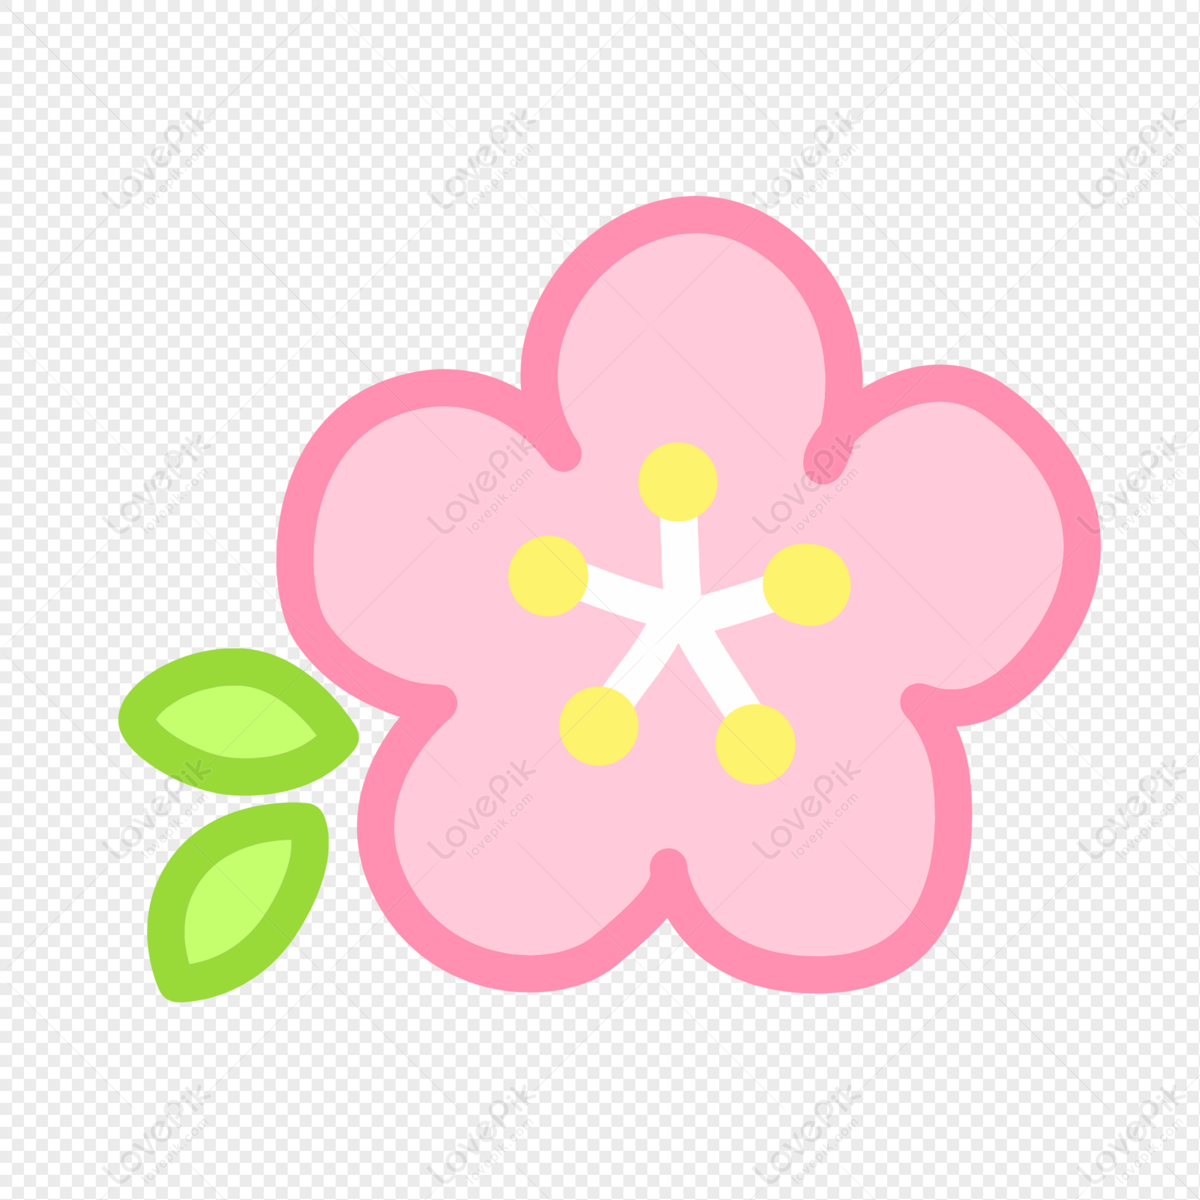 Hand Drawn Cartoon Pink Flowers Free PNG And Clipart Image For Free  Download - Lovepik | 401317809